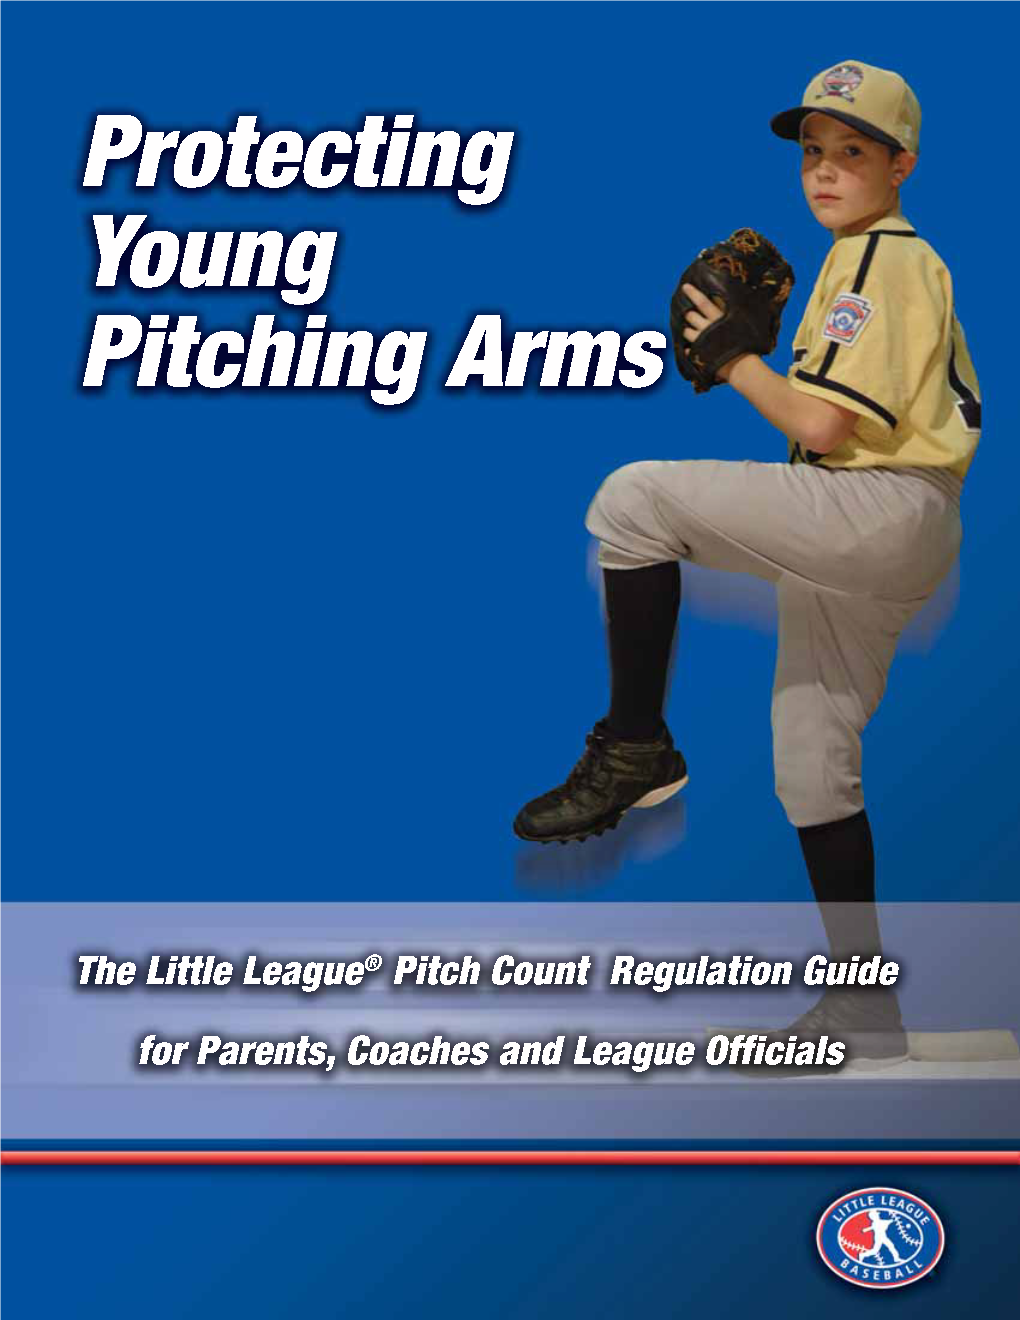 Pitch Counts, Types of Pitches, Quality of Mechanics, and Other Factors